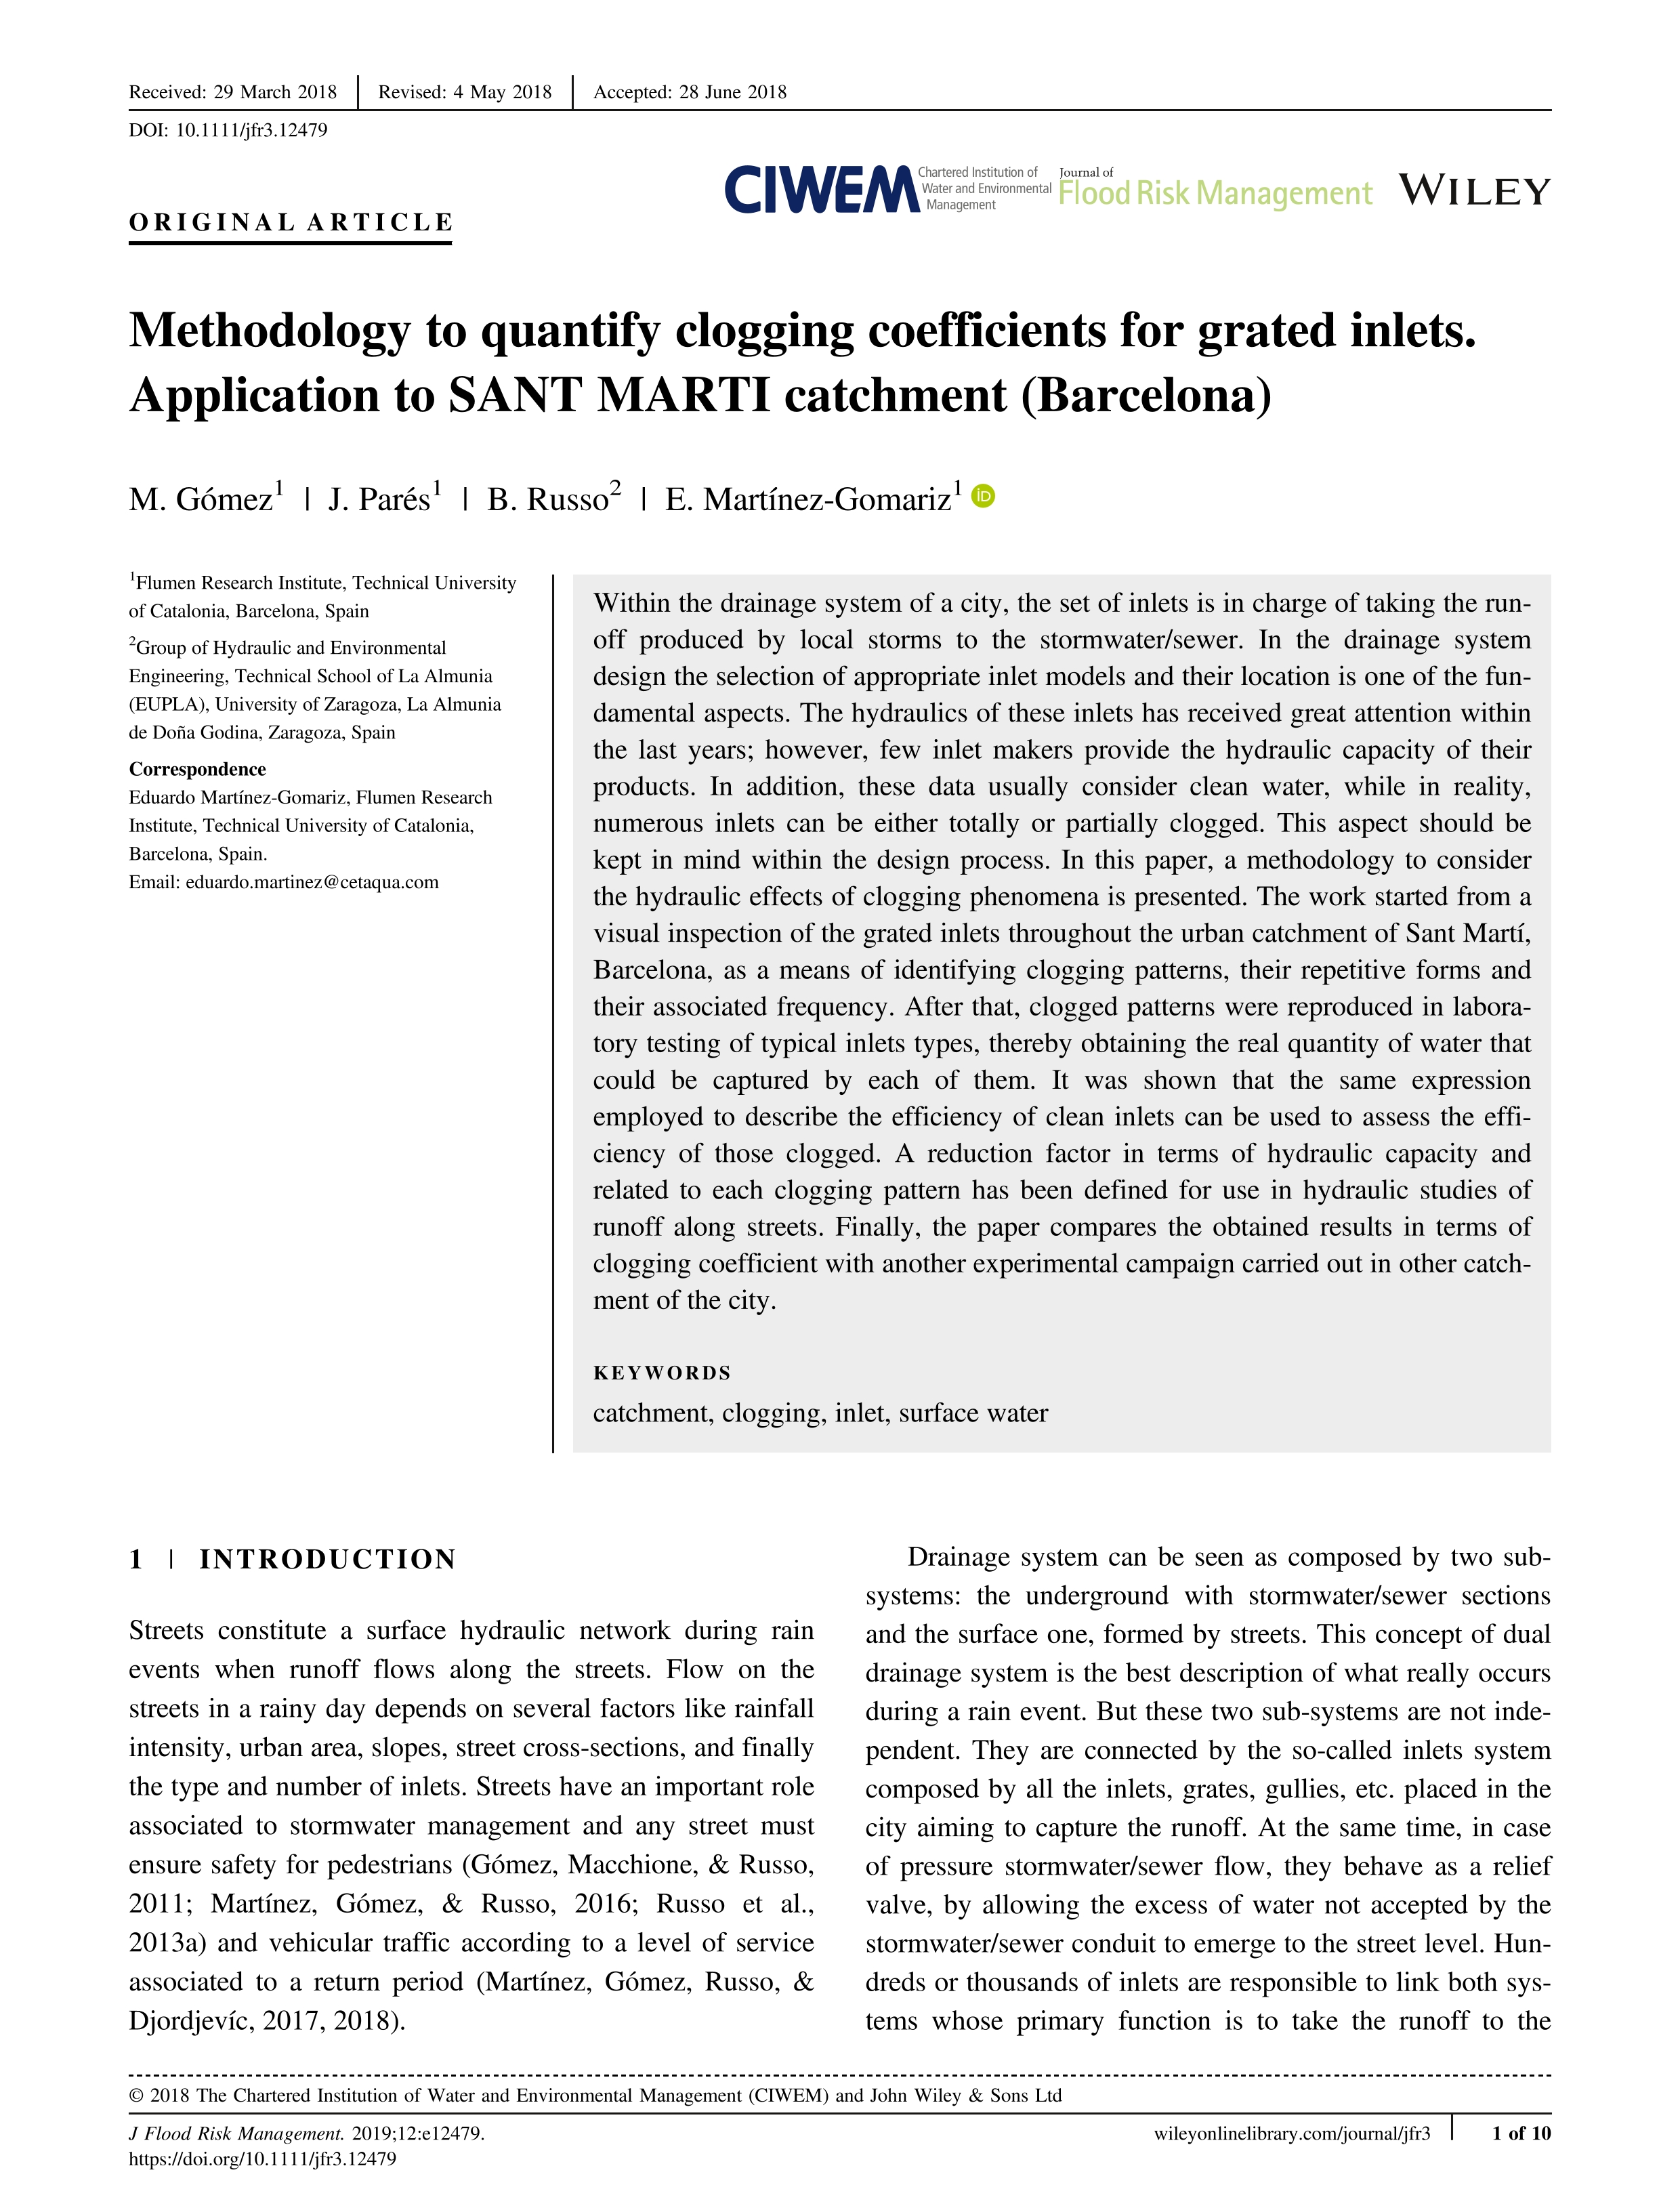 Methodology to quantify clogging coefficients for grated inlets. Application to SANT MARTI catchment (Barcelona)